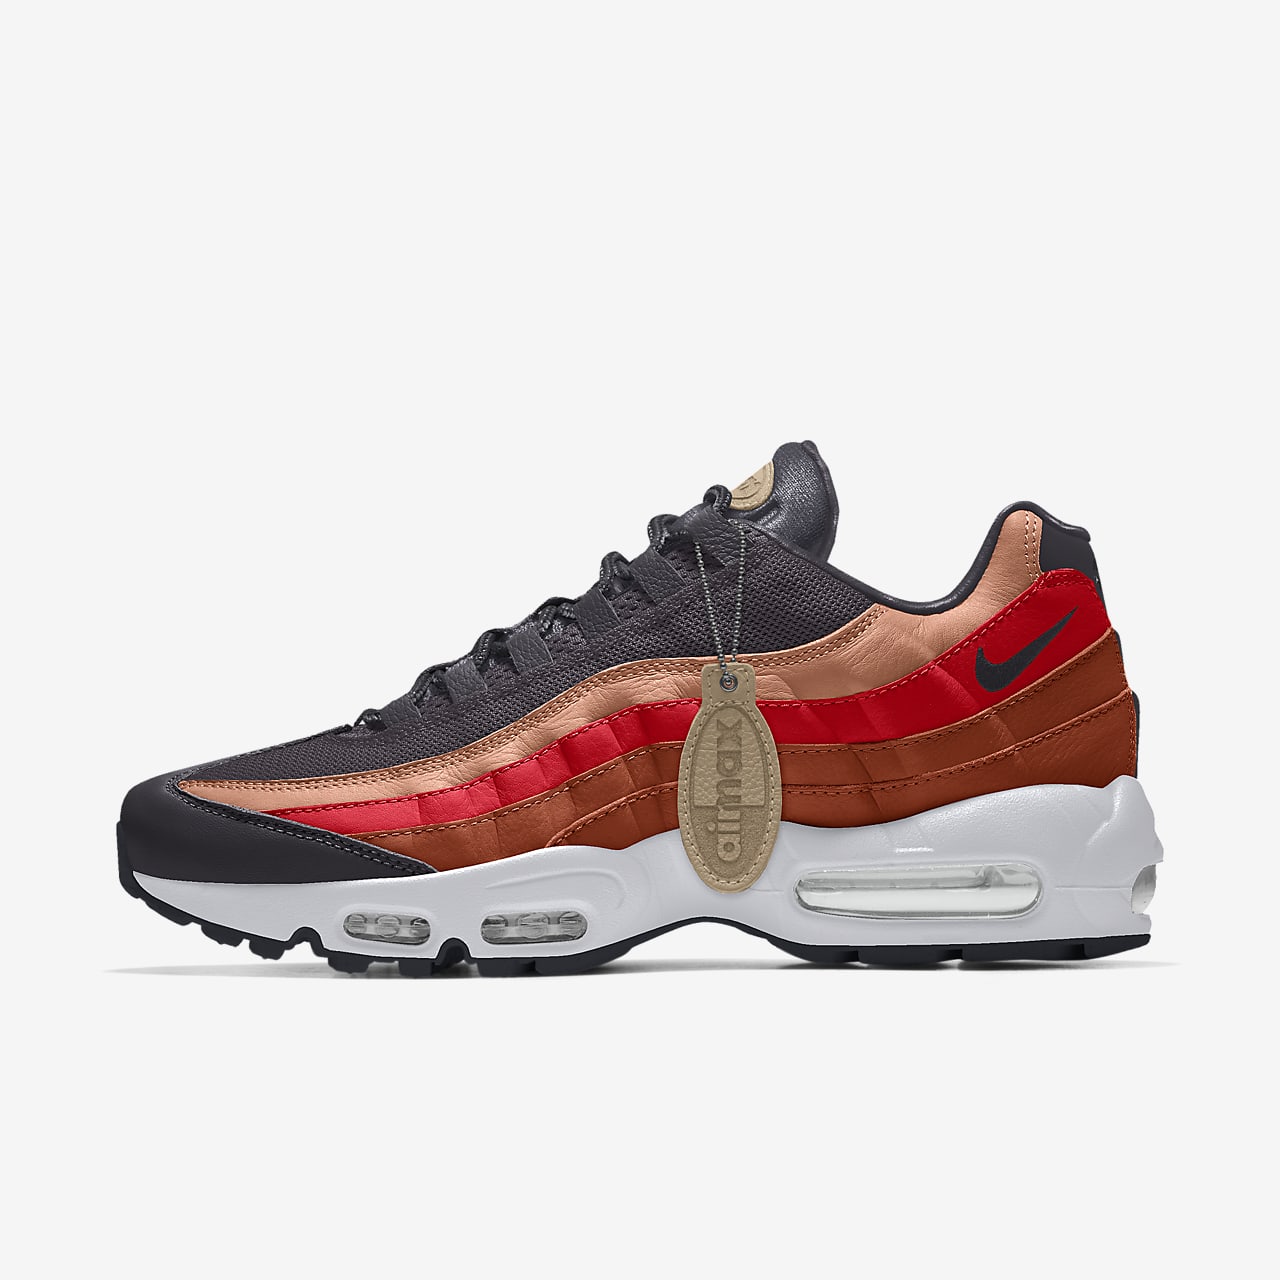 customize nike shoes air max